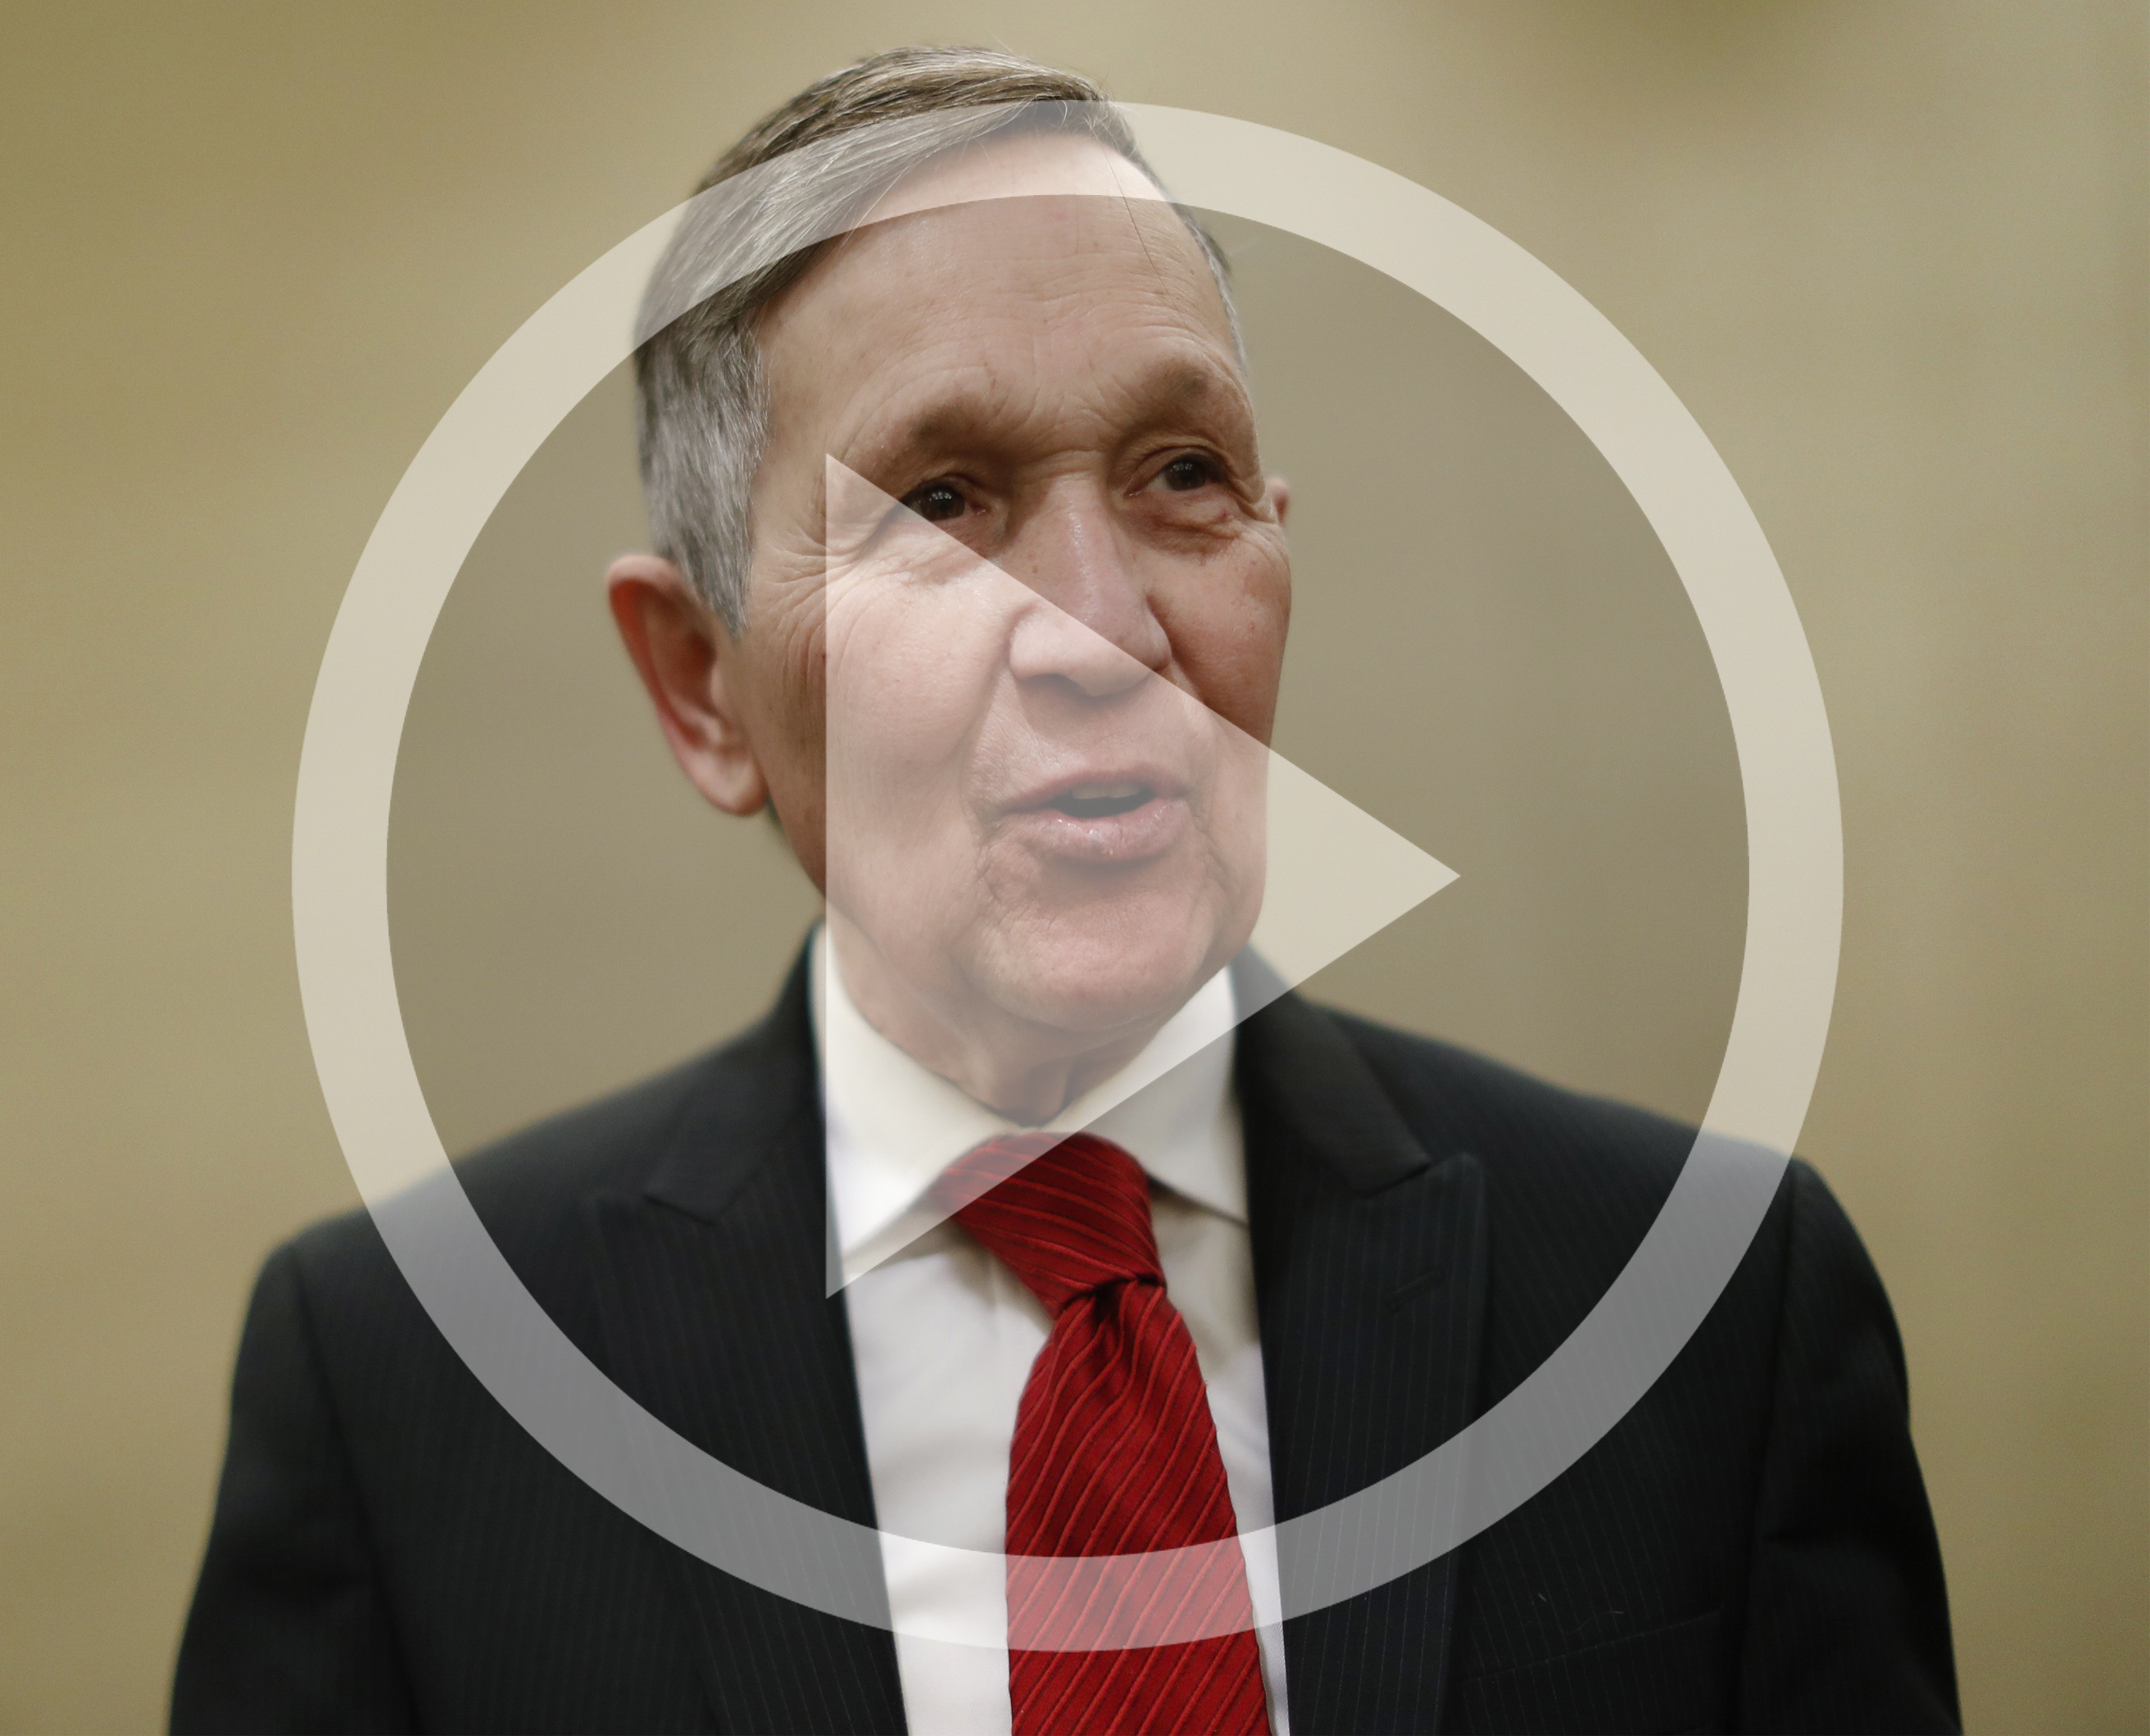 A discussion with Dennis Kucinich and running mate Tara Samples